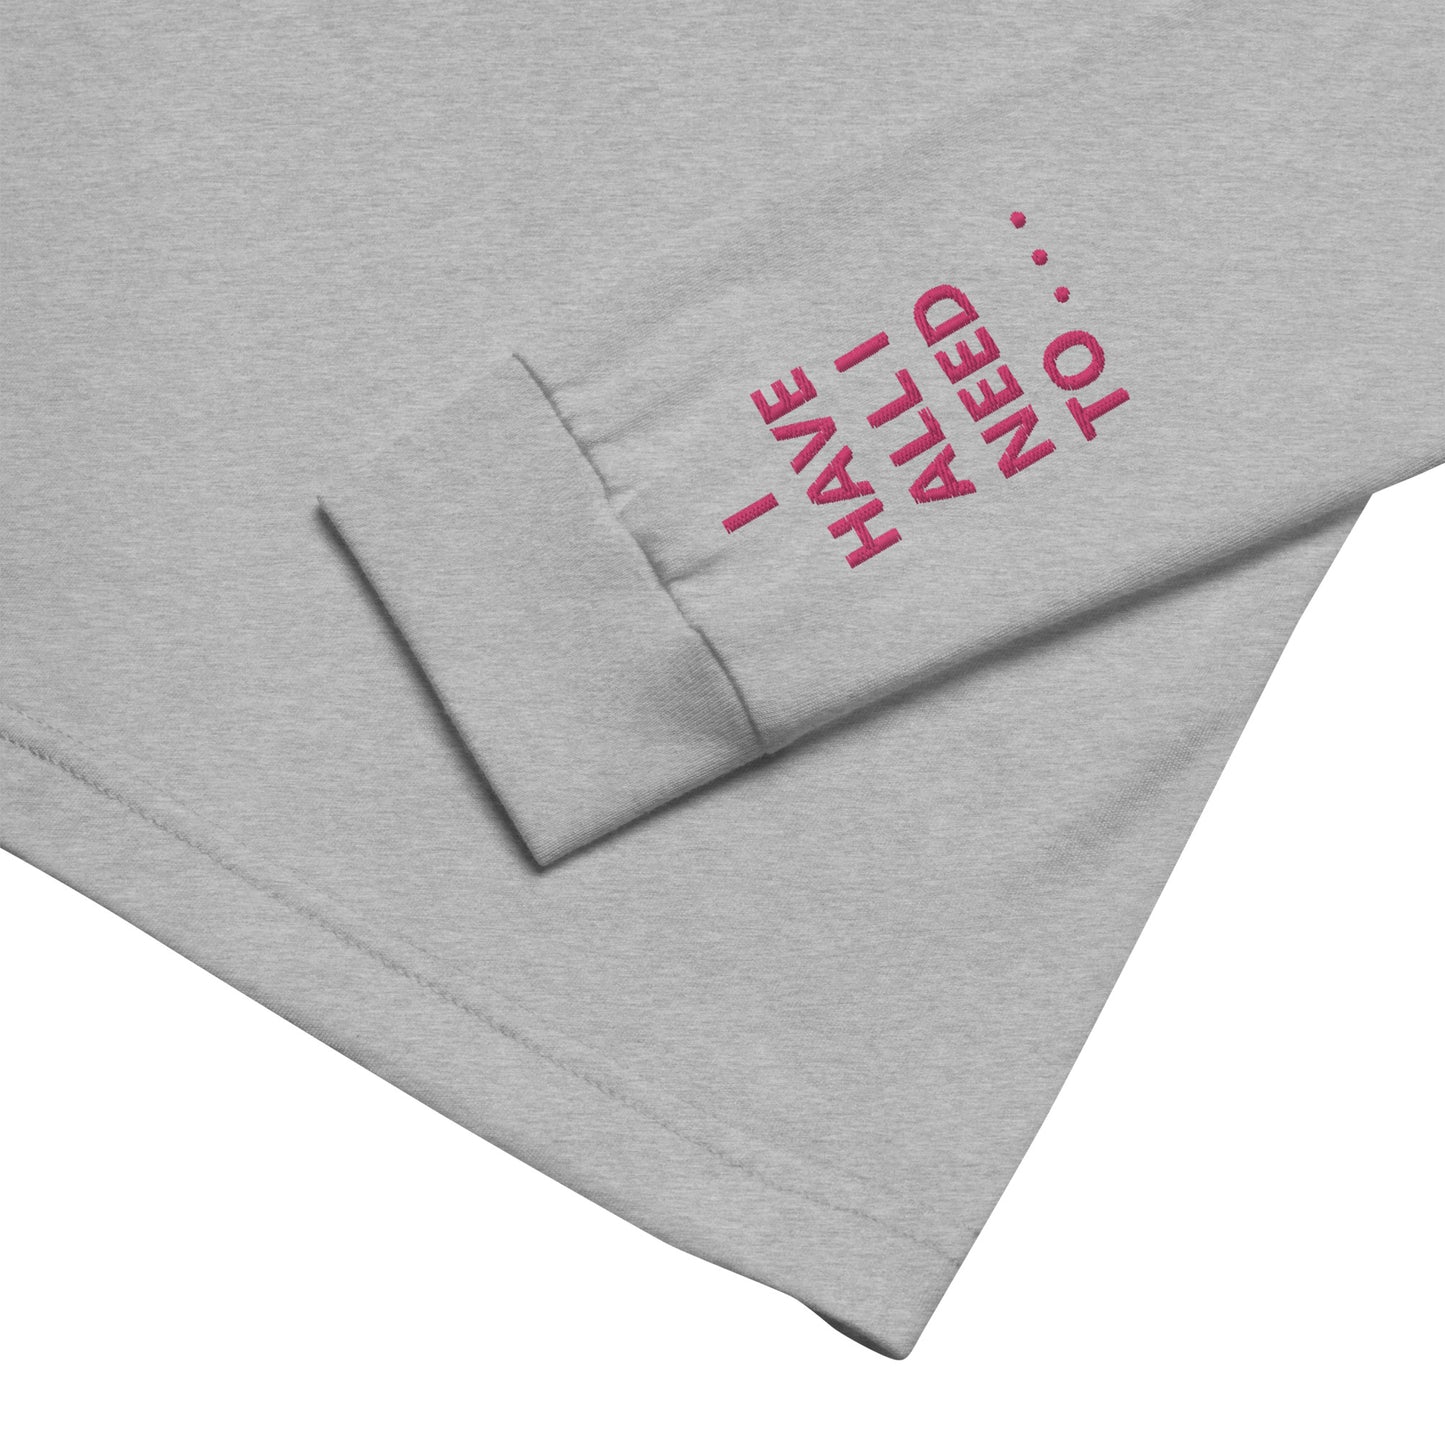 Unisex Long Sleeve Tee - with affirmations on the wrists.